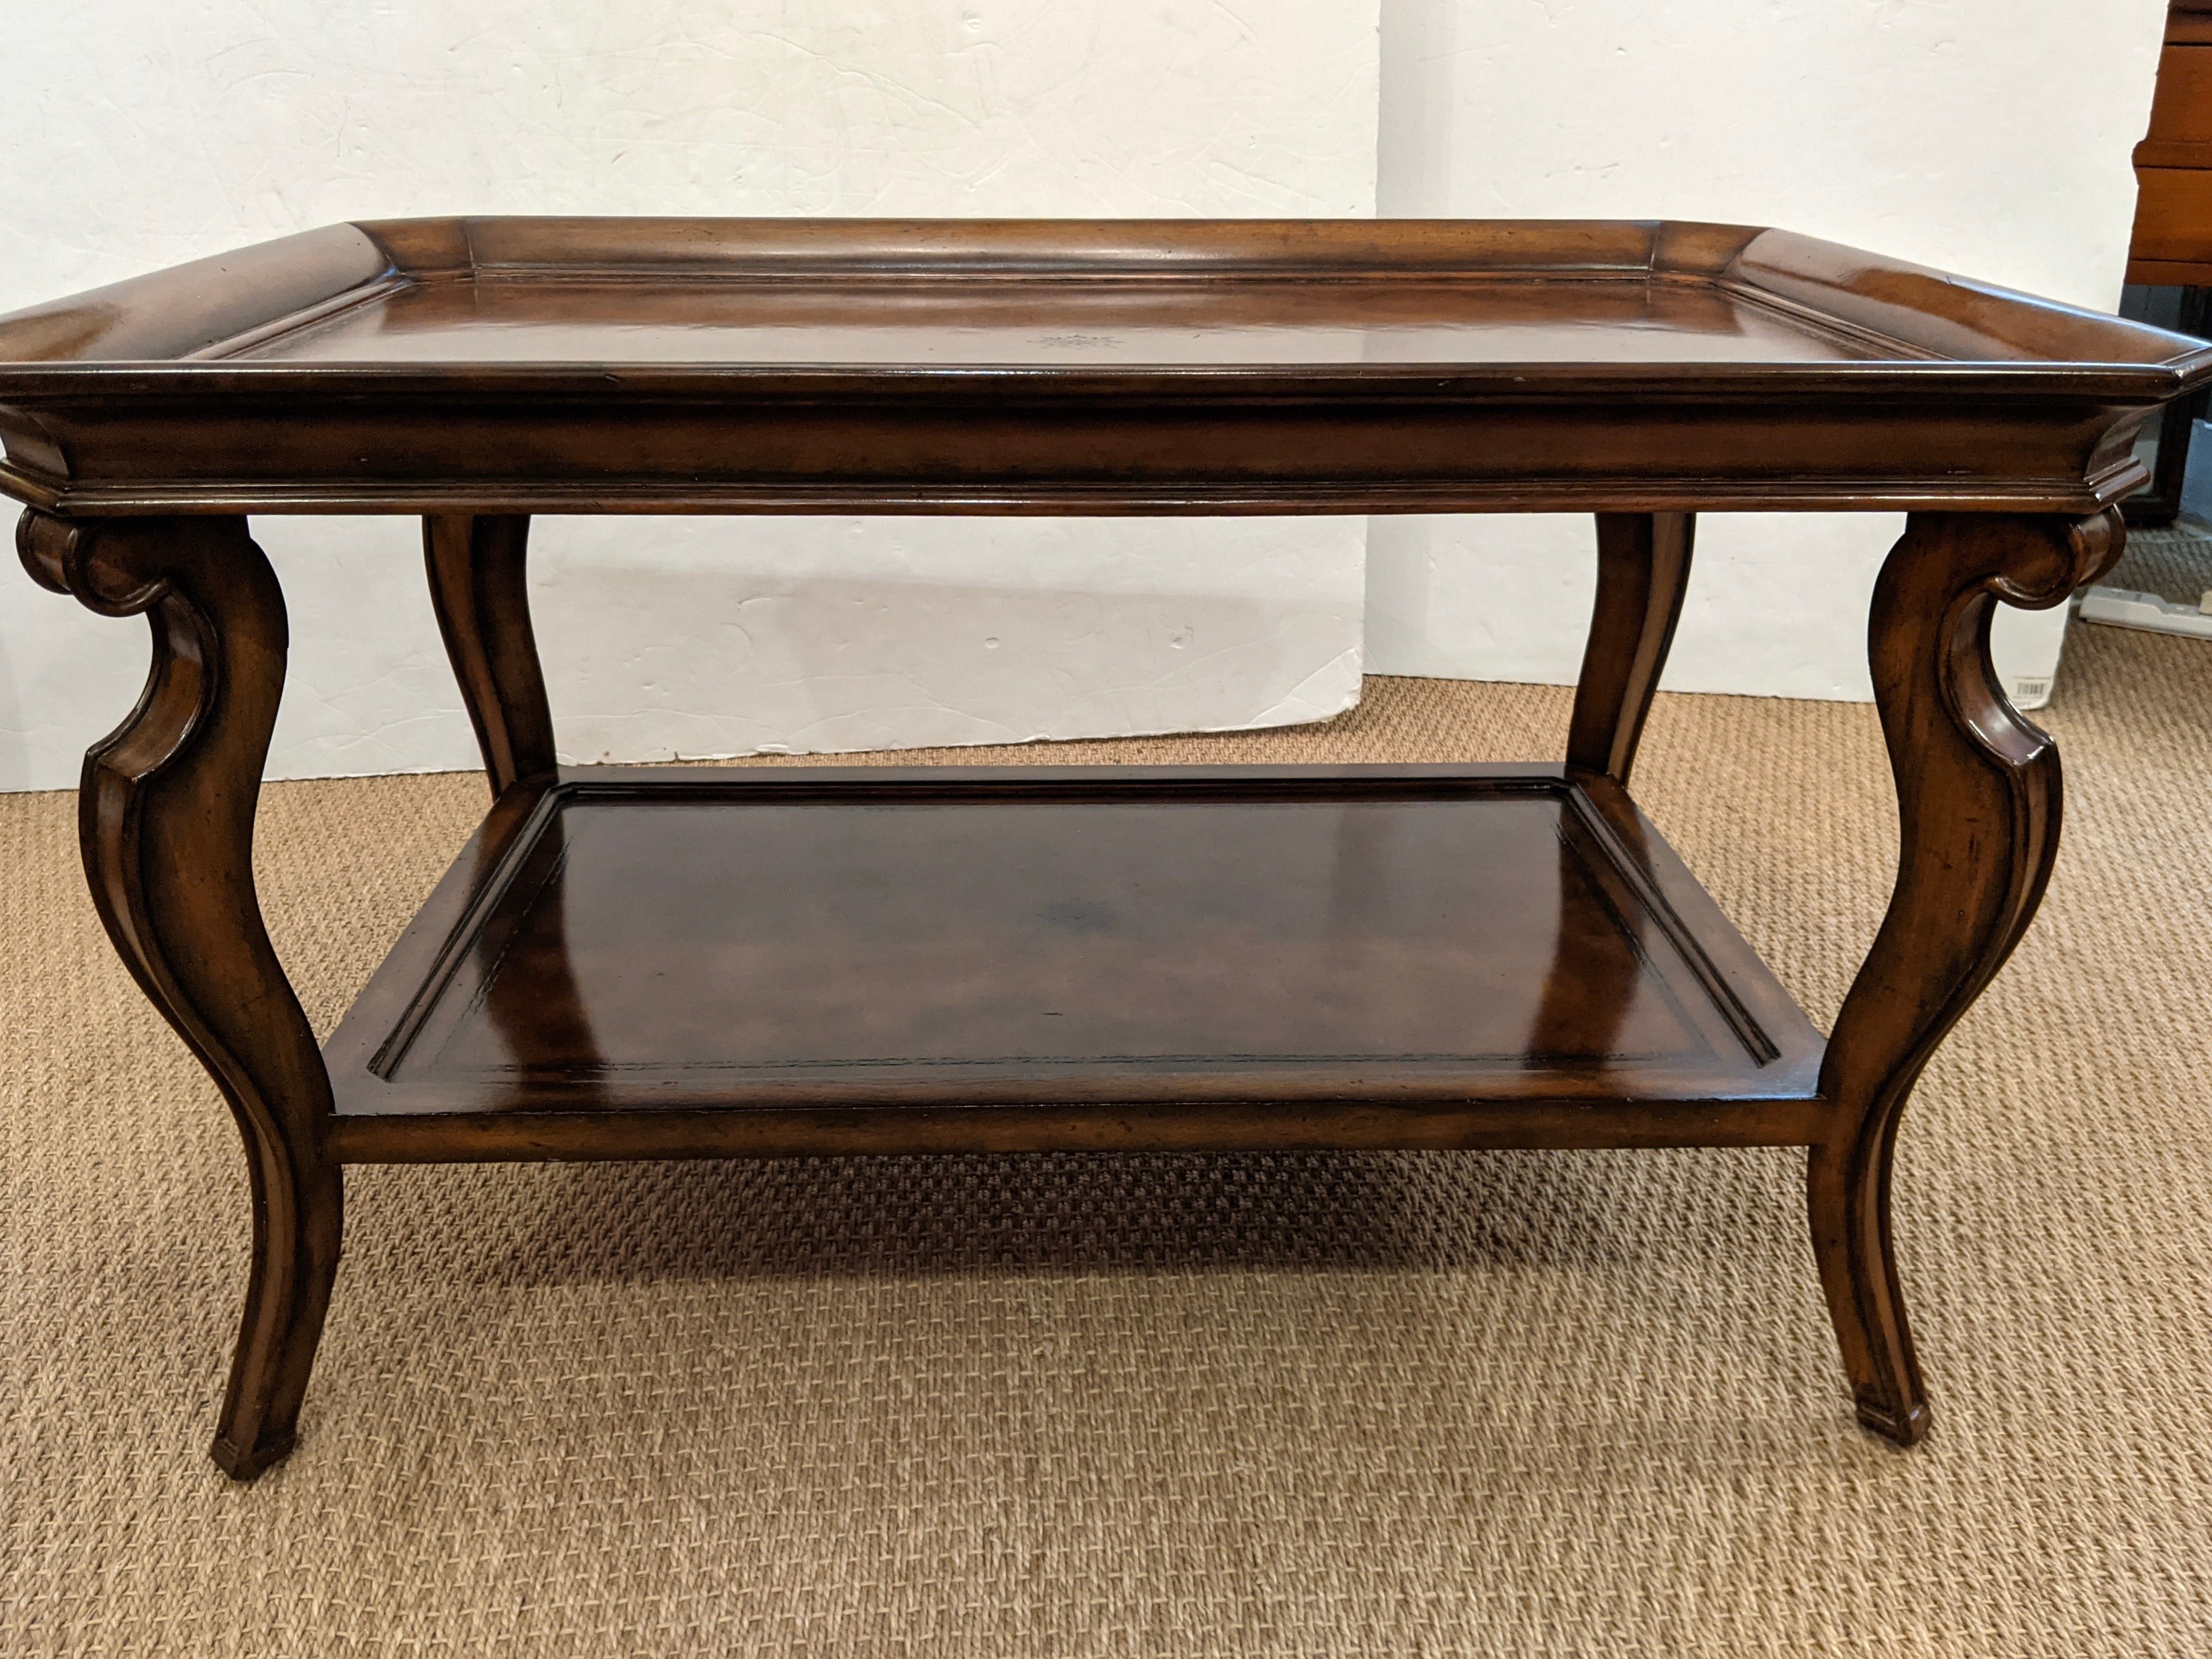 Very elegant two tier burled walnut coffee table having gallery around the top and cabriole shaped legs.